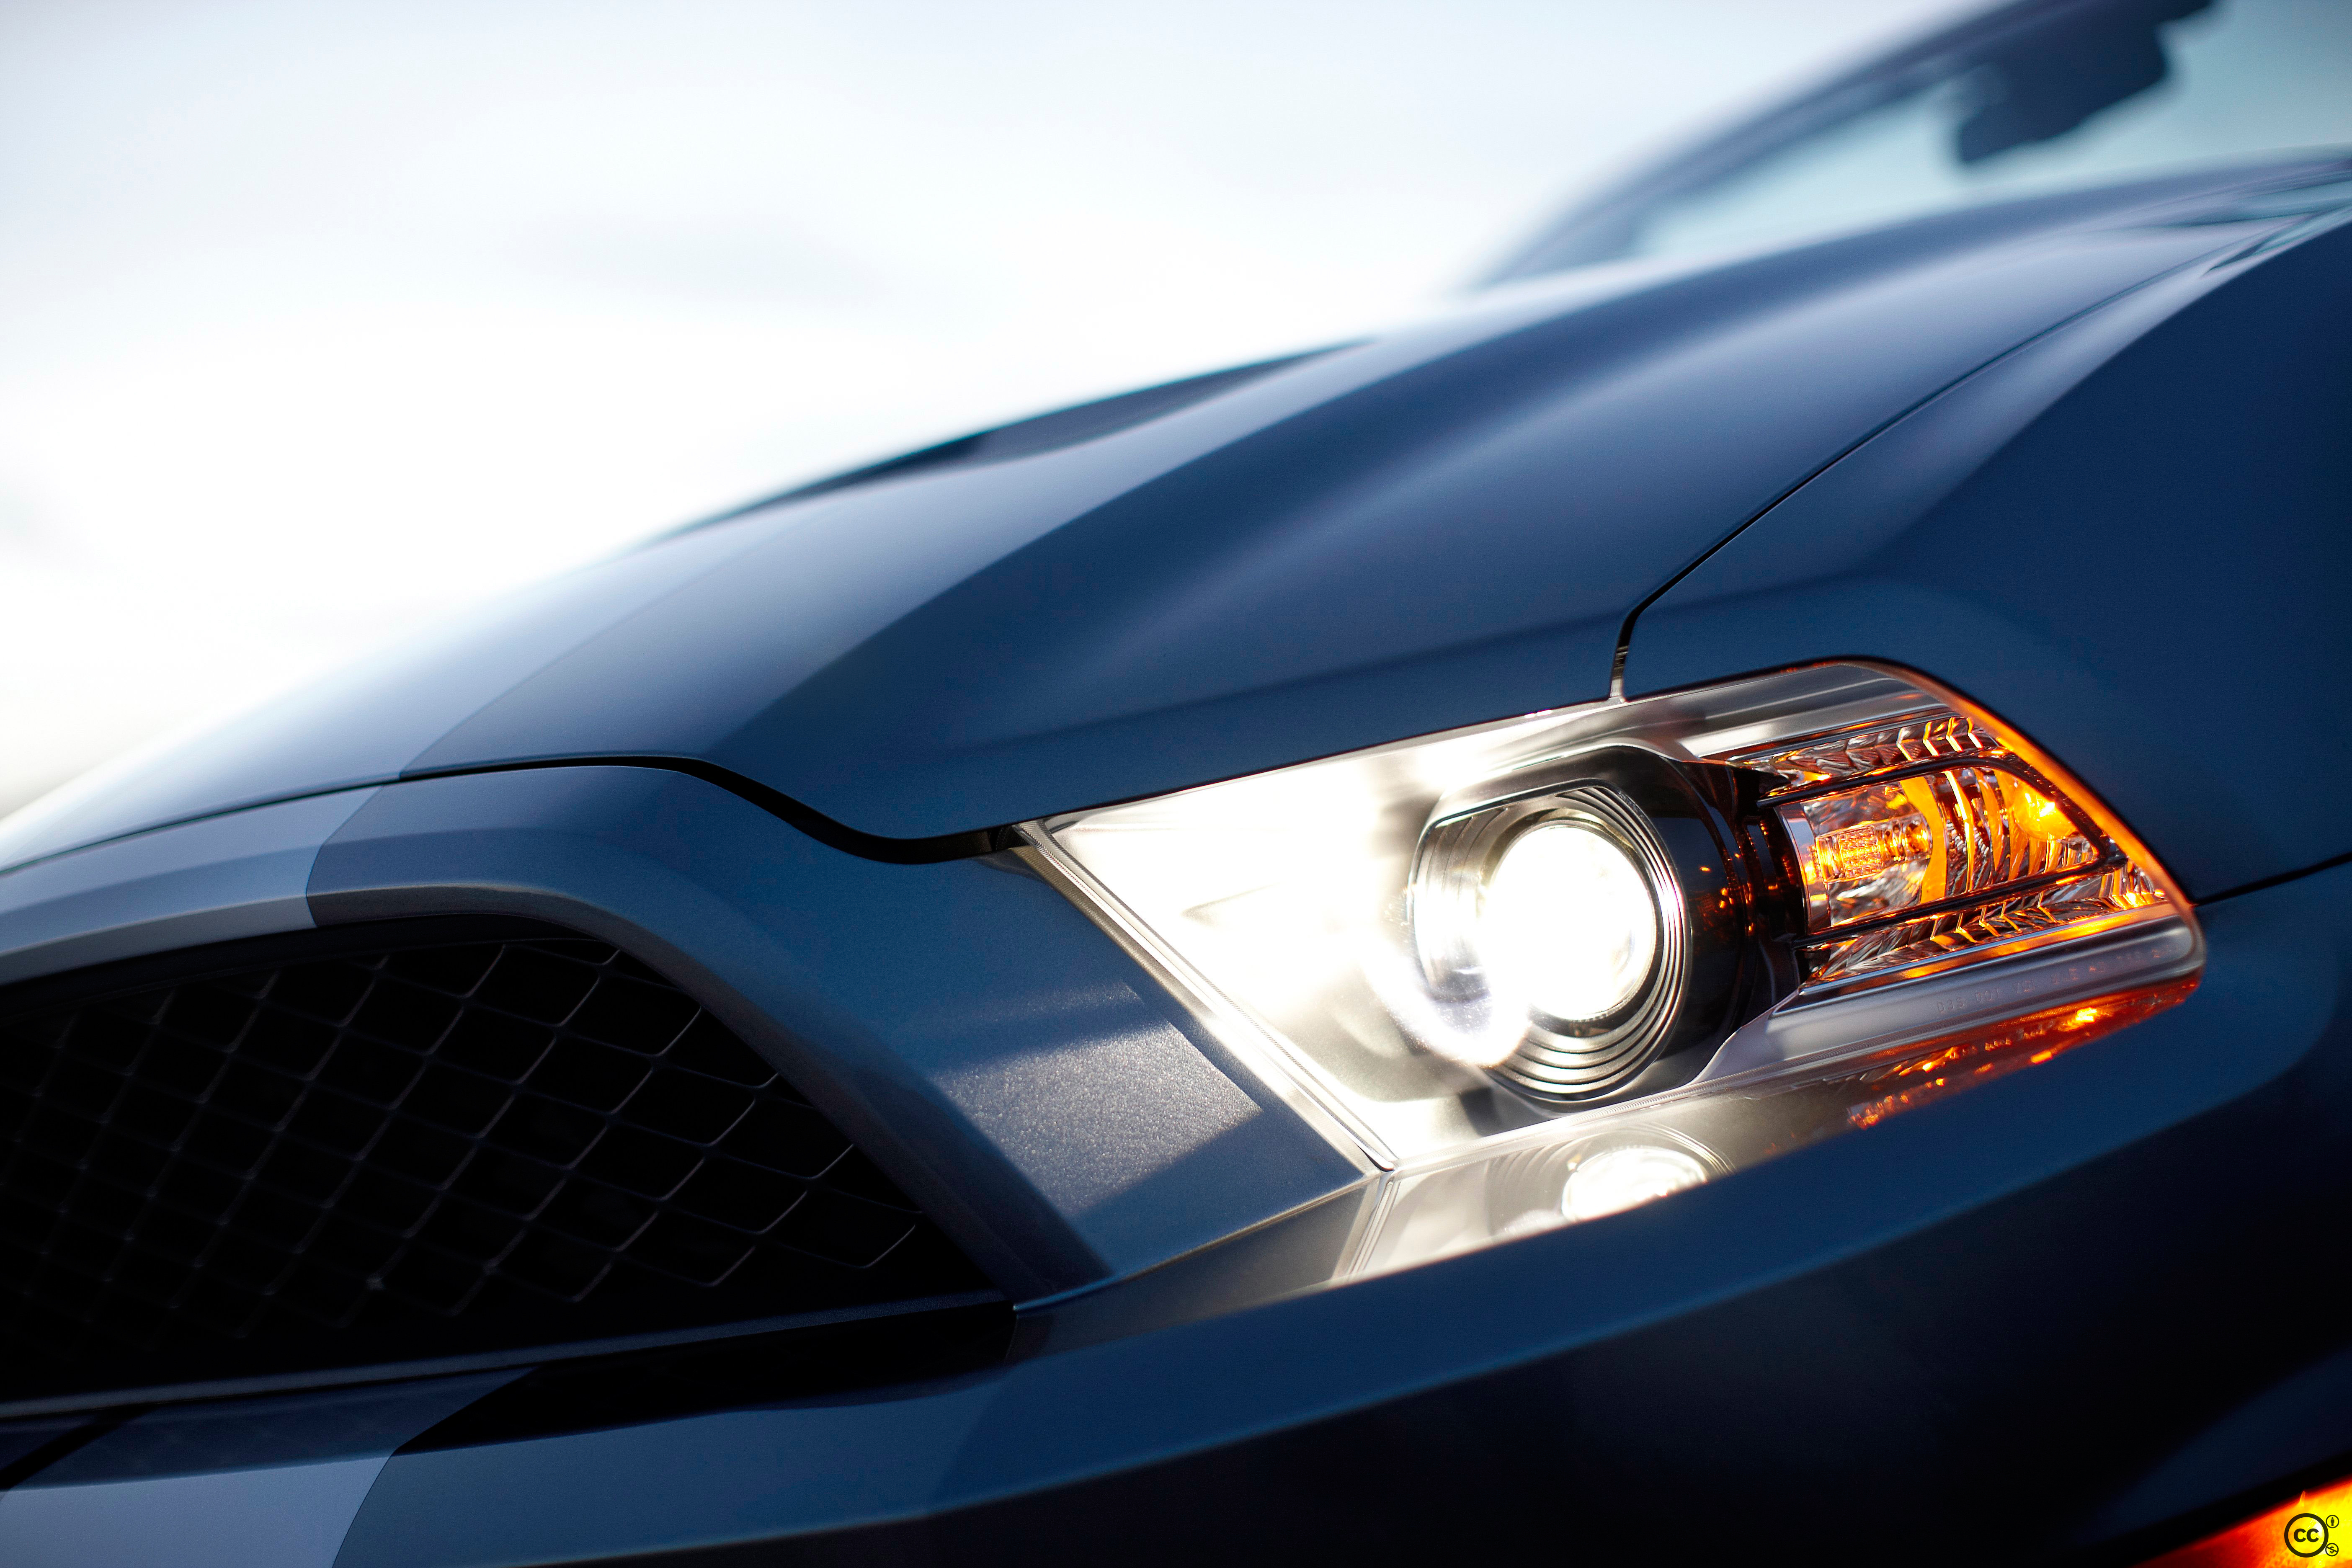 Свет в машине фары. Ford Mustang Shelby gt500 Headlight. Фар Форд Мустанг 2012г. Форд Мустанг 2 фары. Фары Ford Shelby.